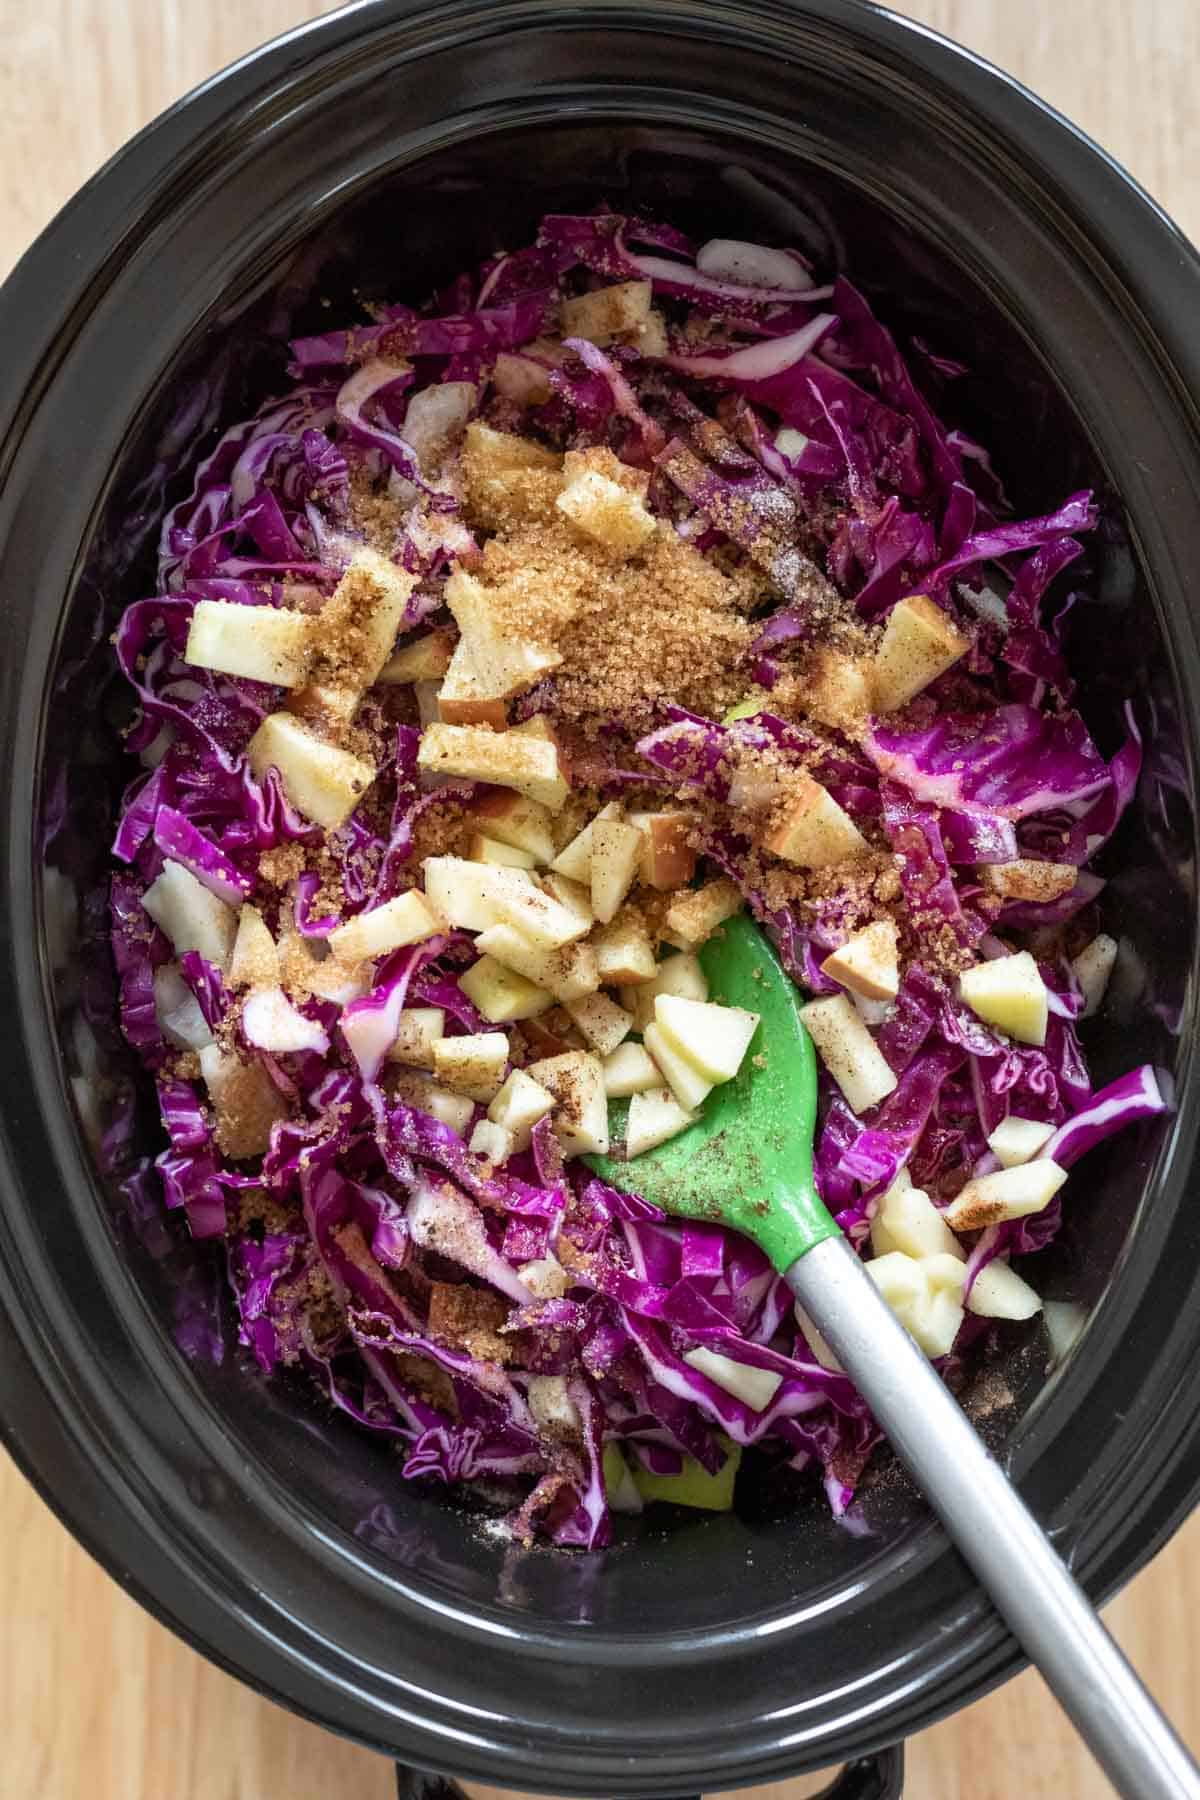 Adding chopped apples, onion, spices, and brown sugar to the red cabbage in the slow cooker.